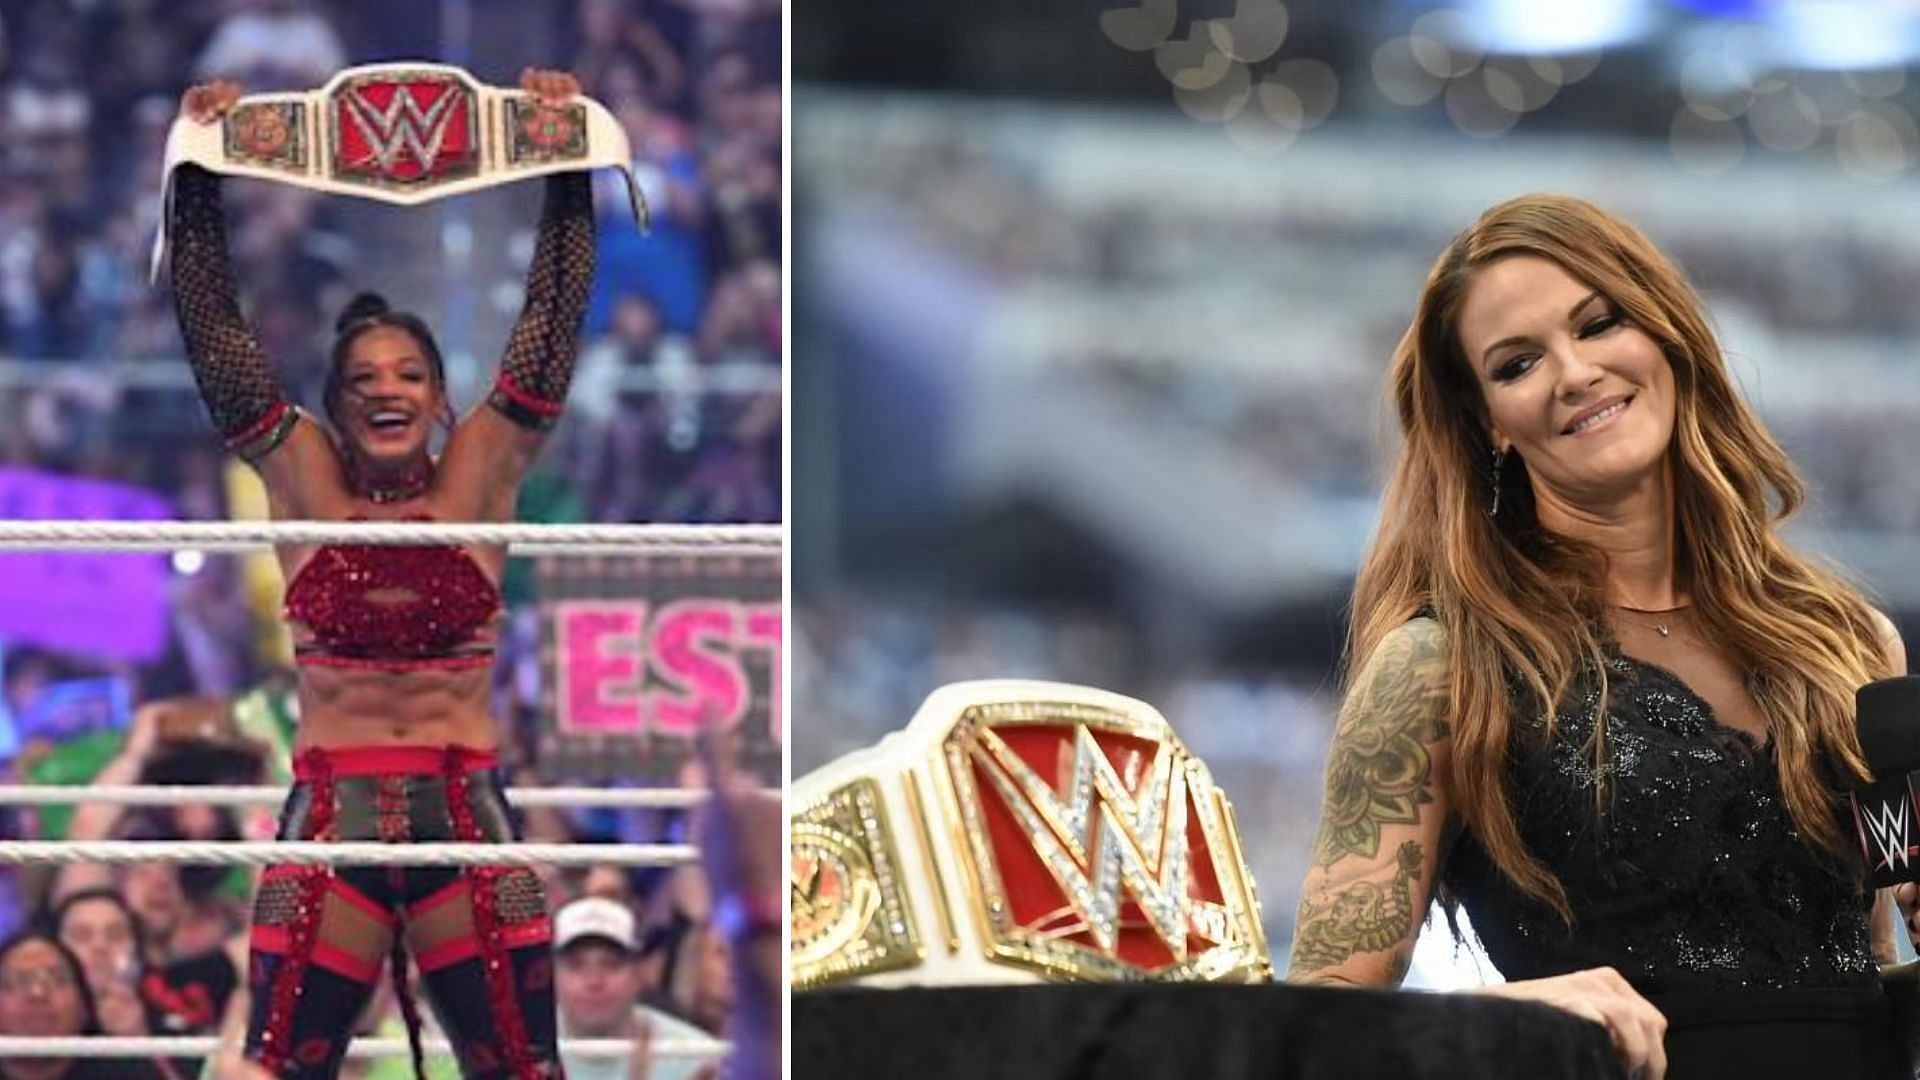 Lita is a WWE legend worthy of a title shot straight away upon return